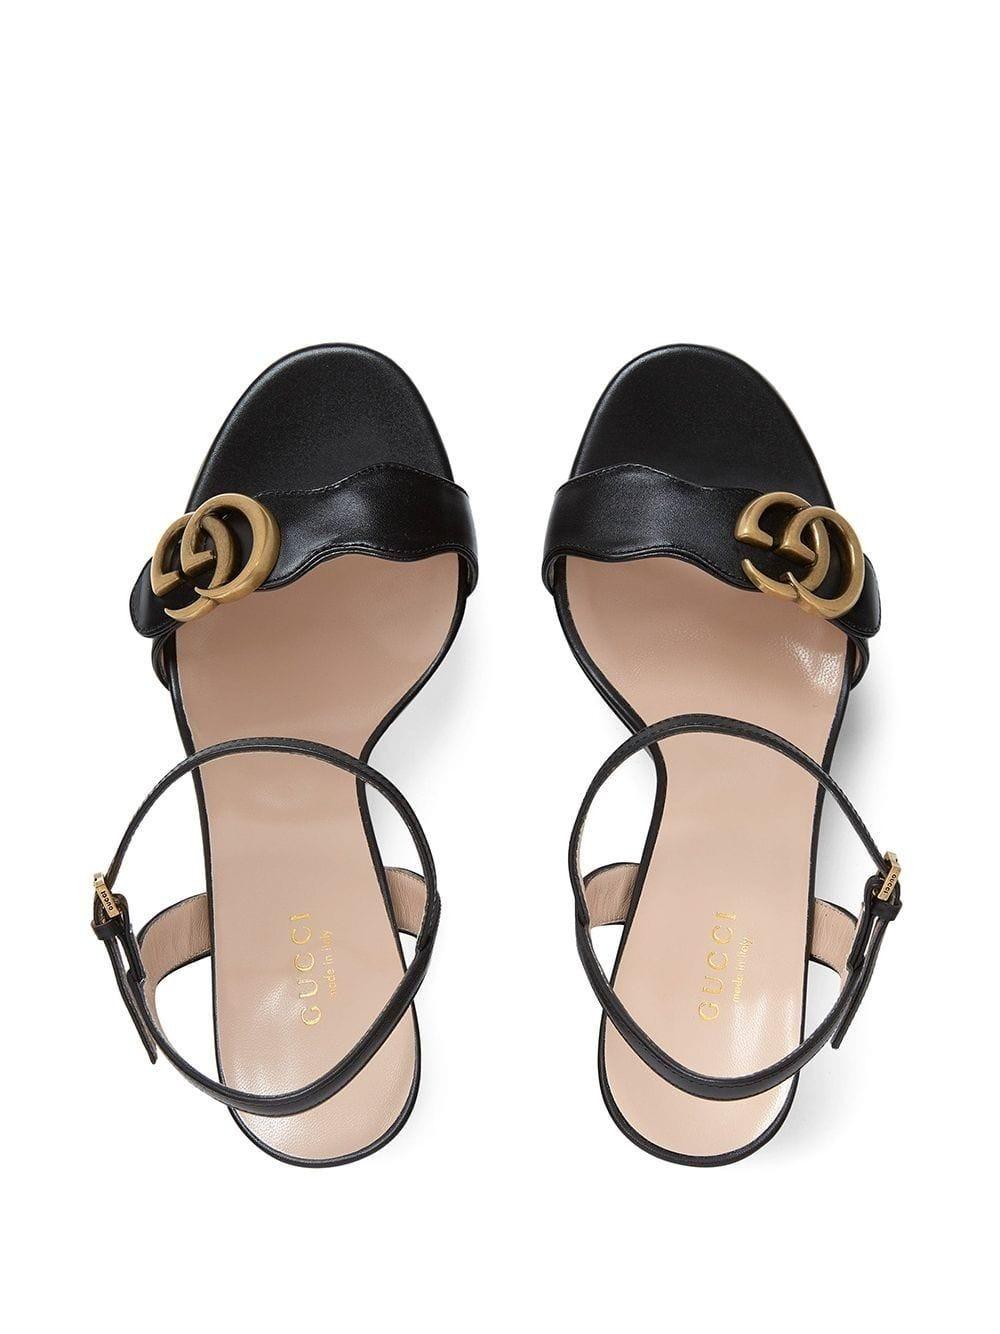 gucci platform sandal with double g